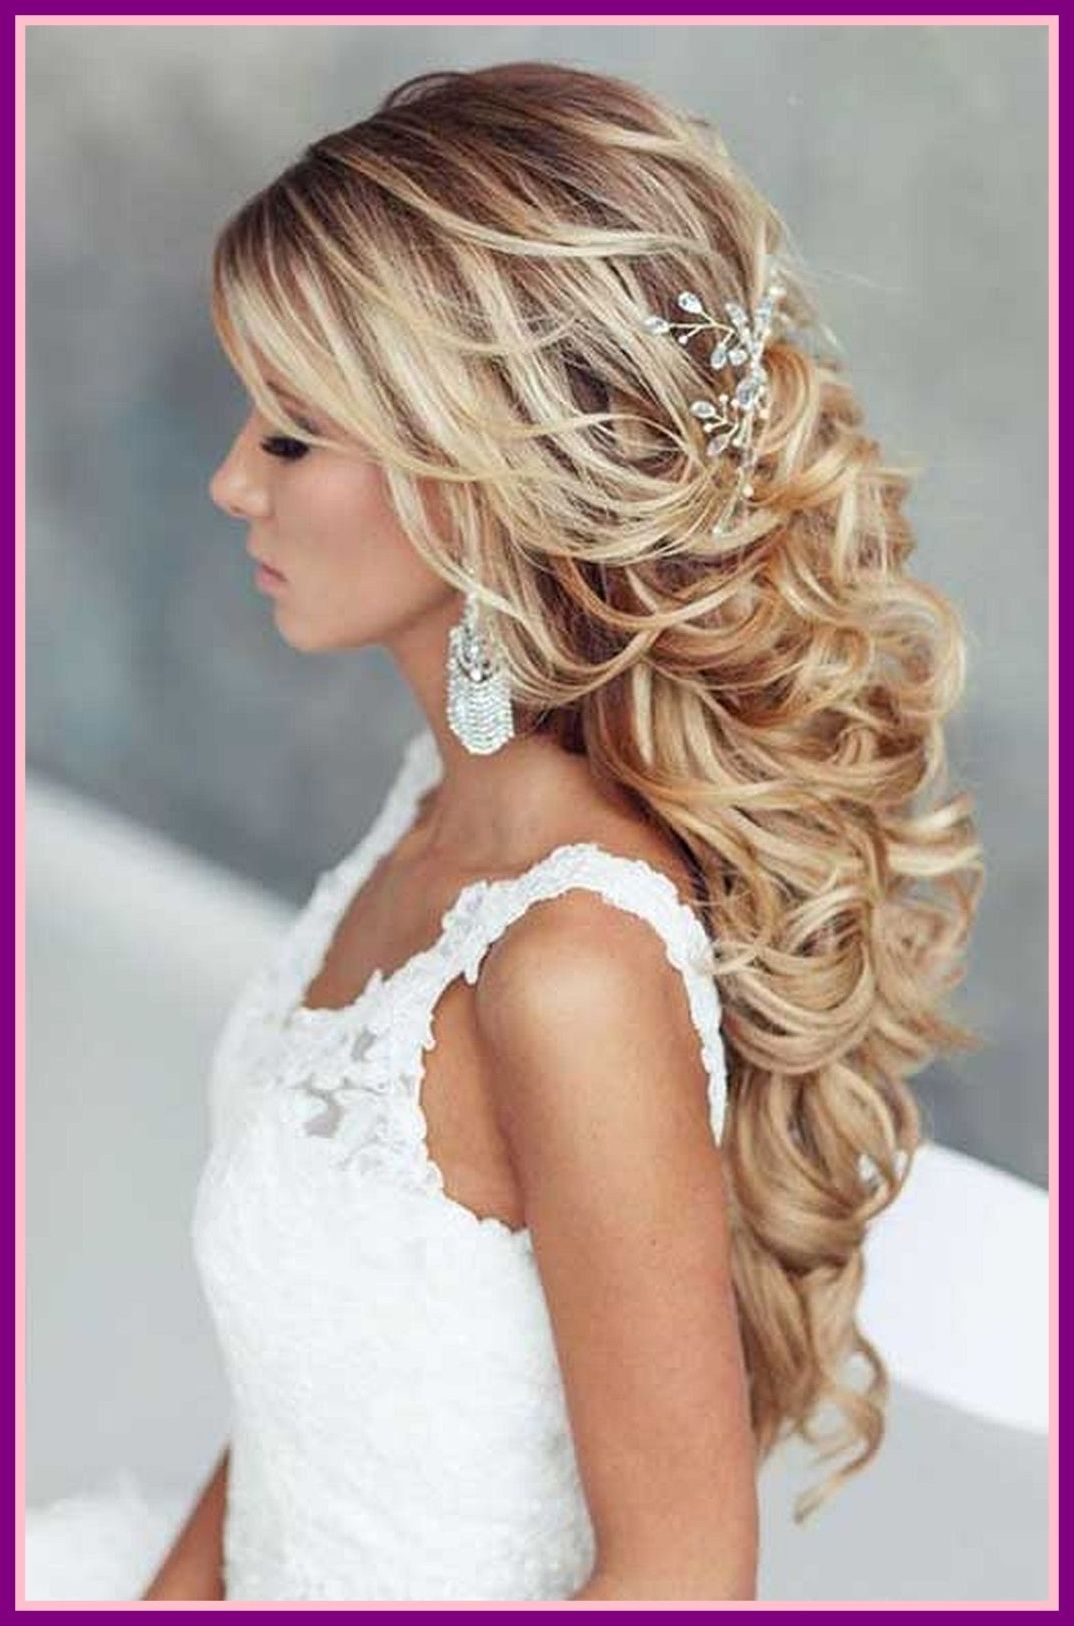 Astonishing Hairstyle Idea For Your Wedding Pic Of Long Curly Hair Regarding Most Recently Released Wedding Updos For Long Curly Hair (View 7 of 15)